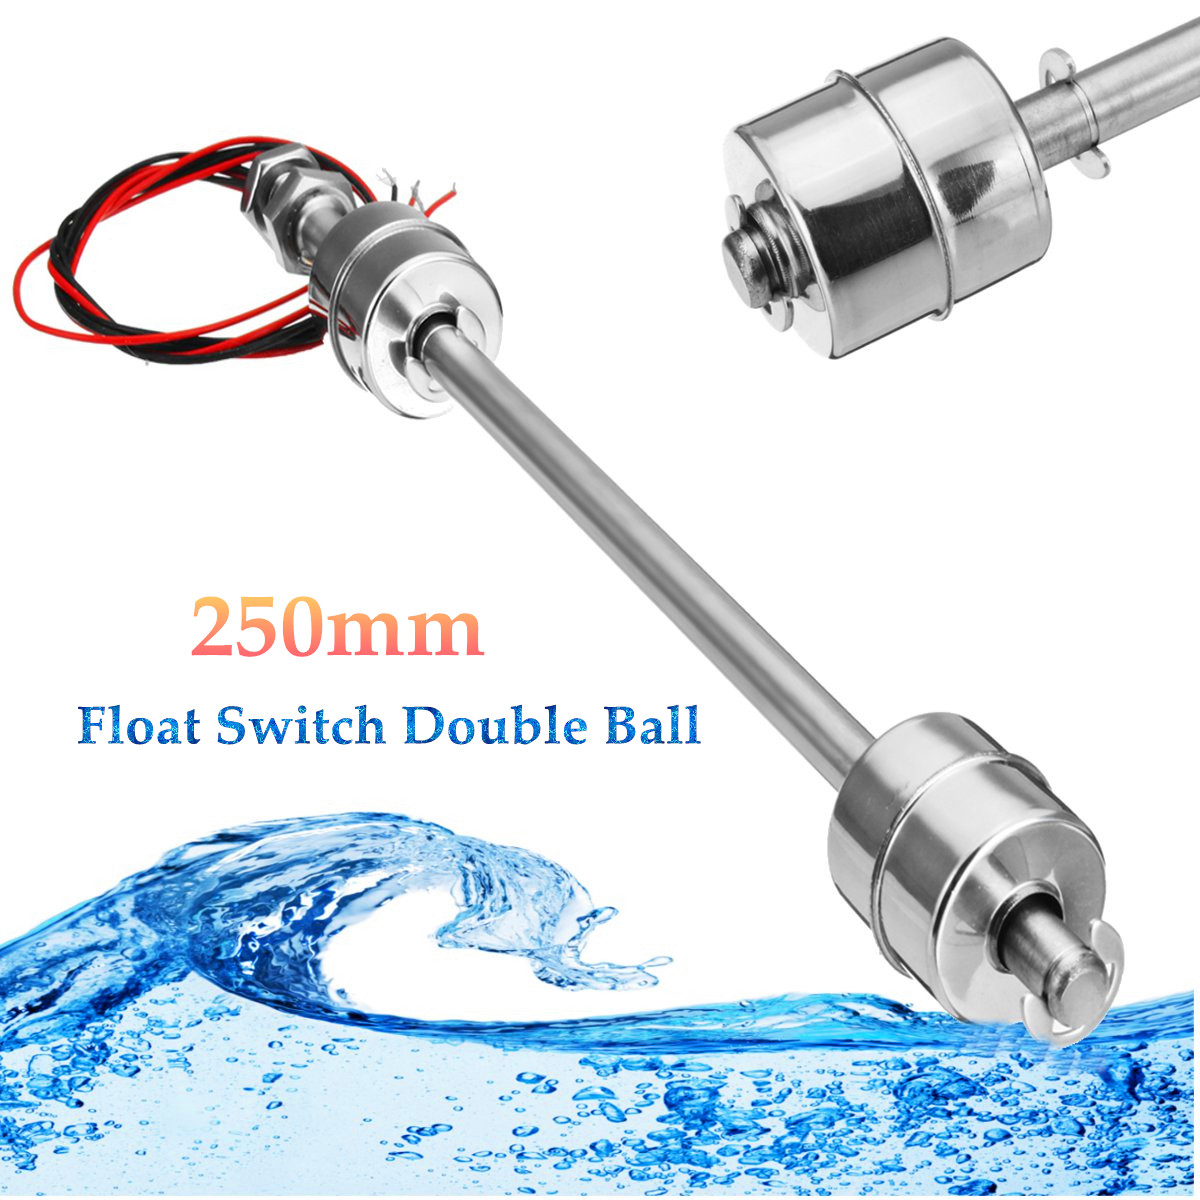 Float Switch Stainless Steel Double Ball